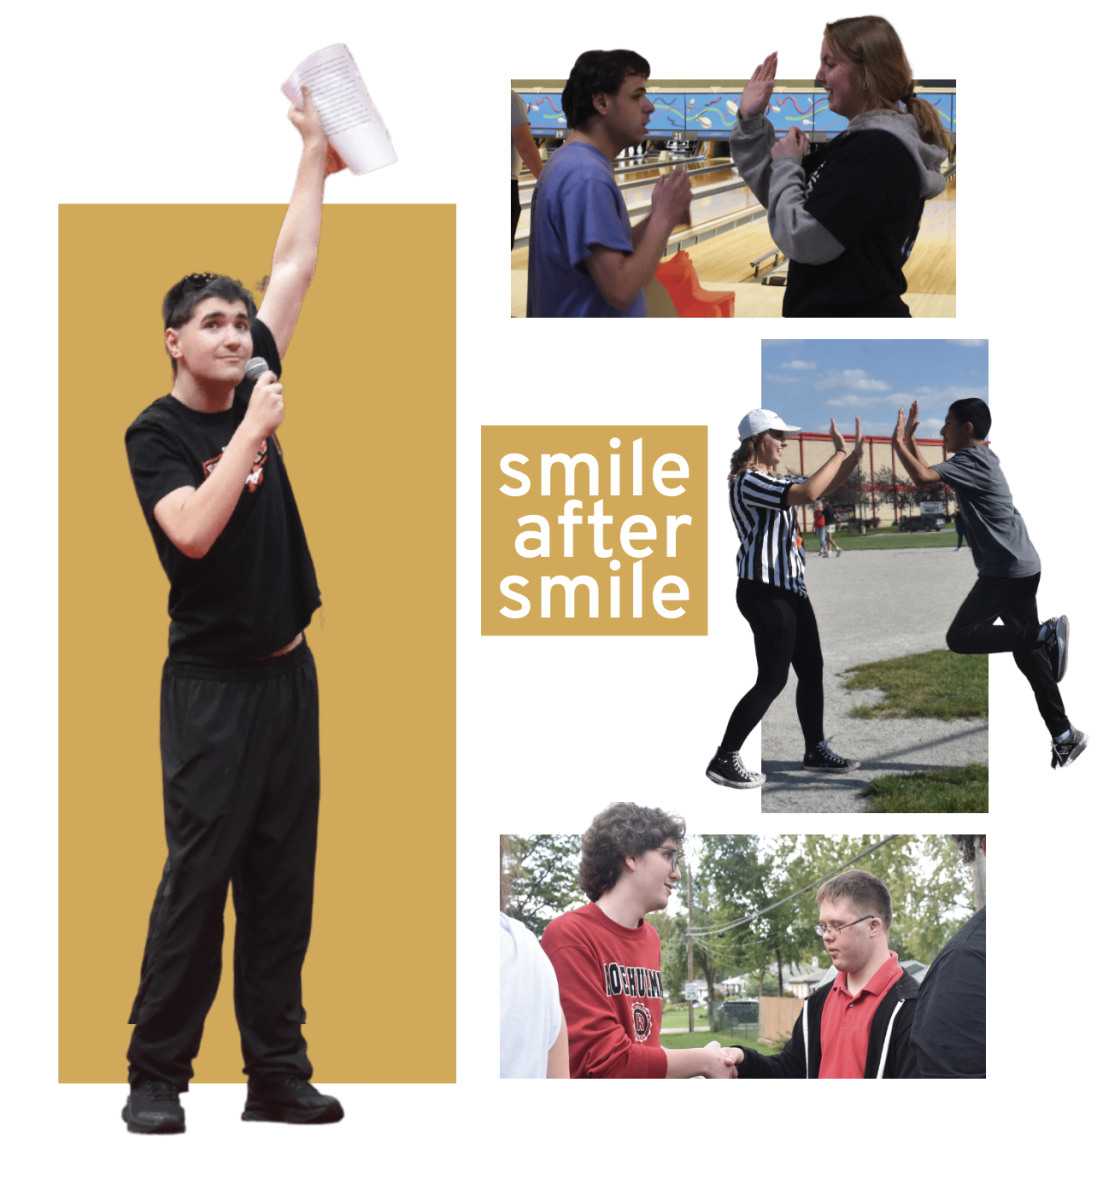 Smile after smile: Best Buddies’ recap of their events  so far and future projects coming up